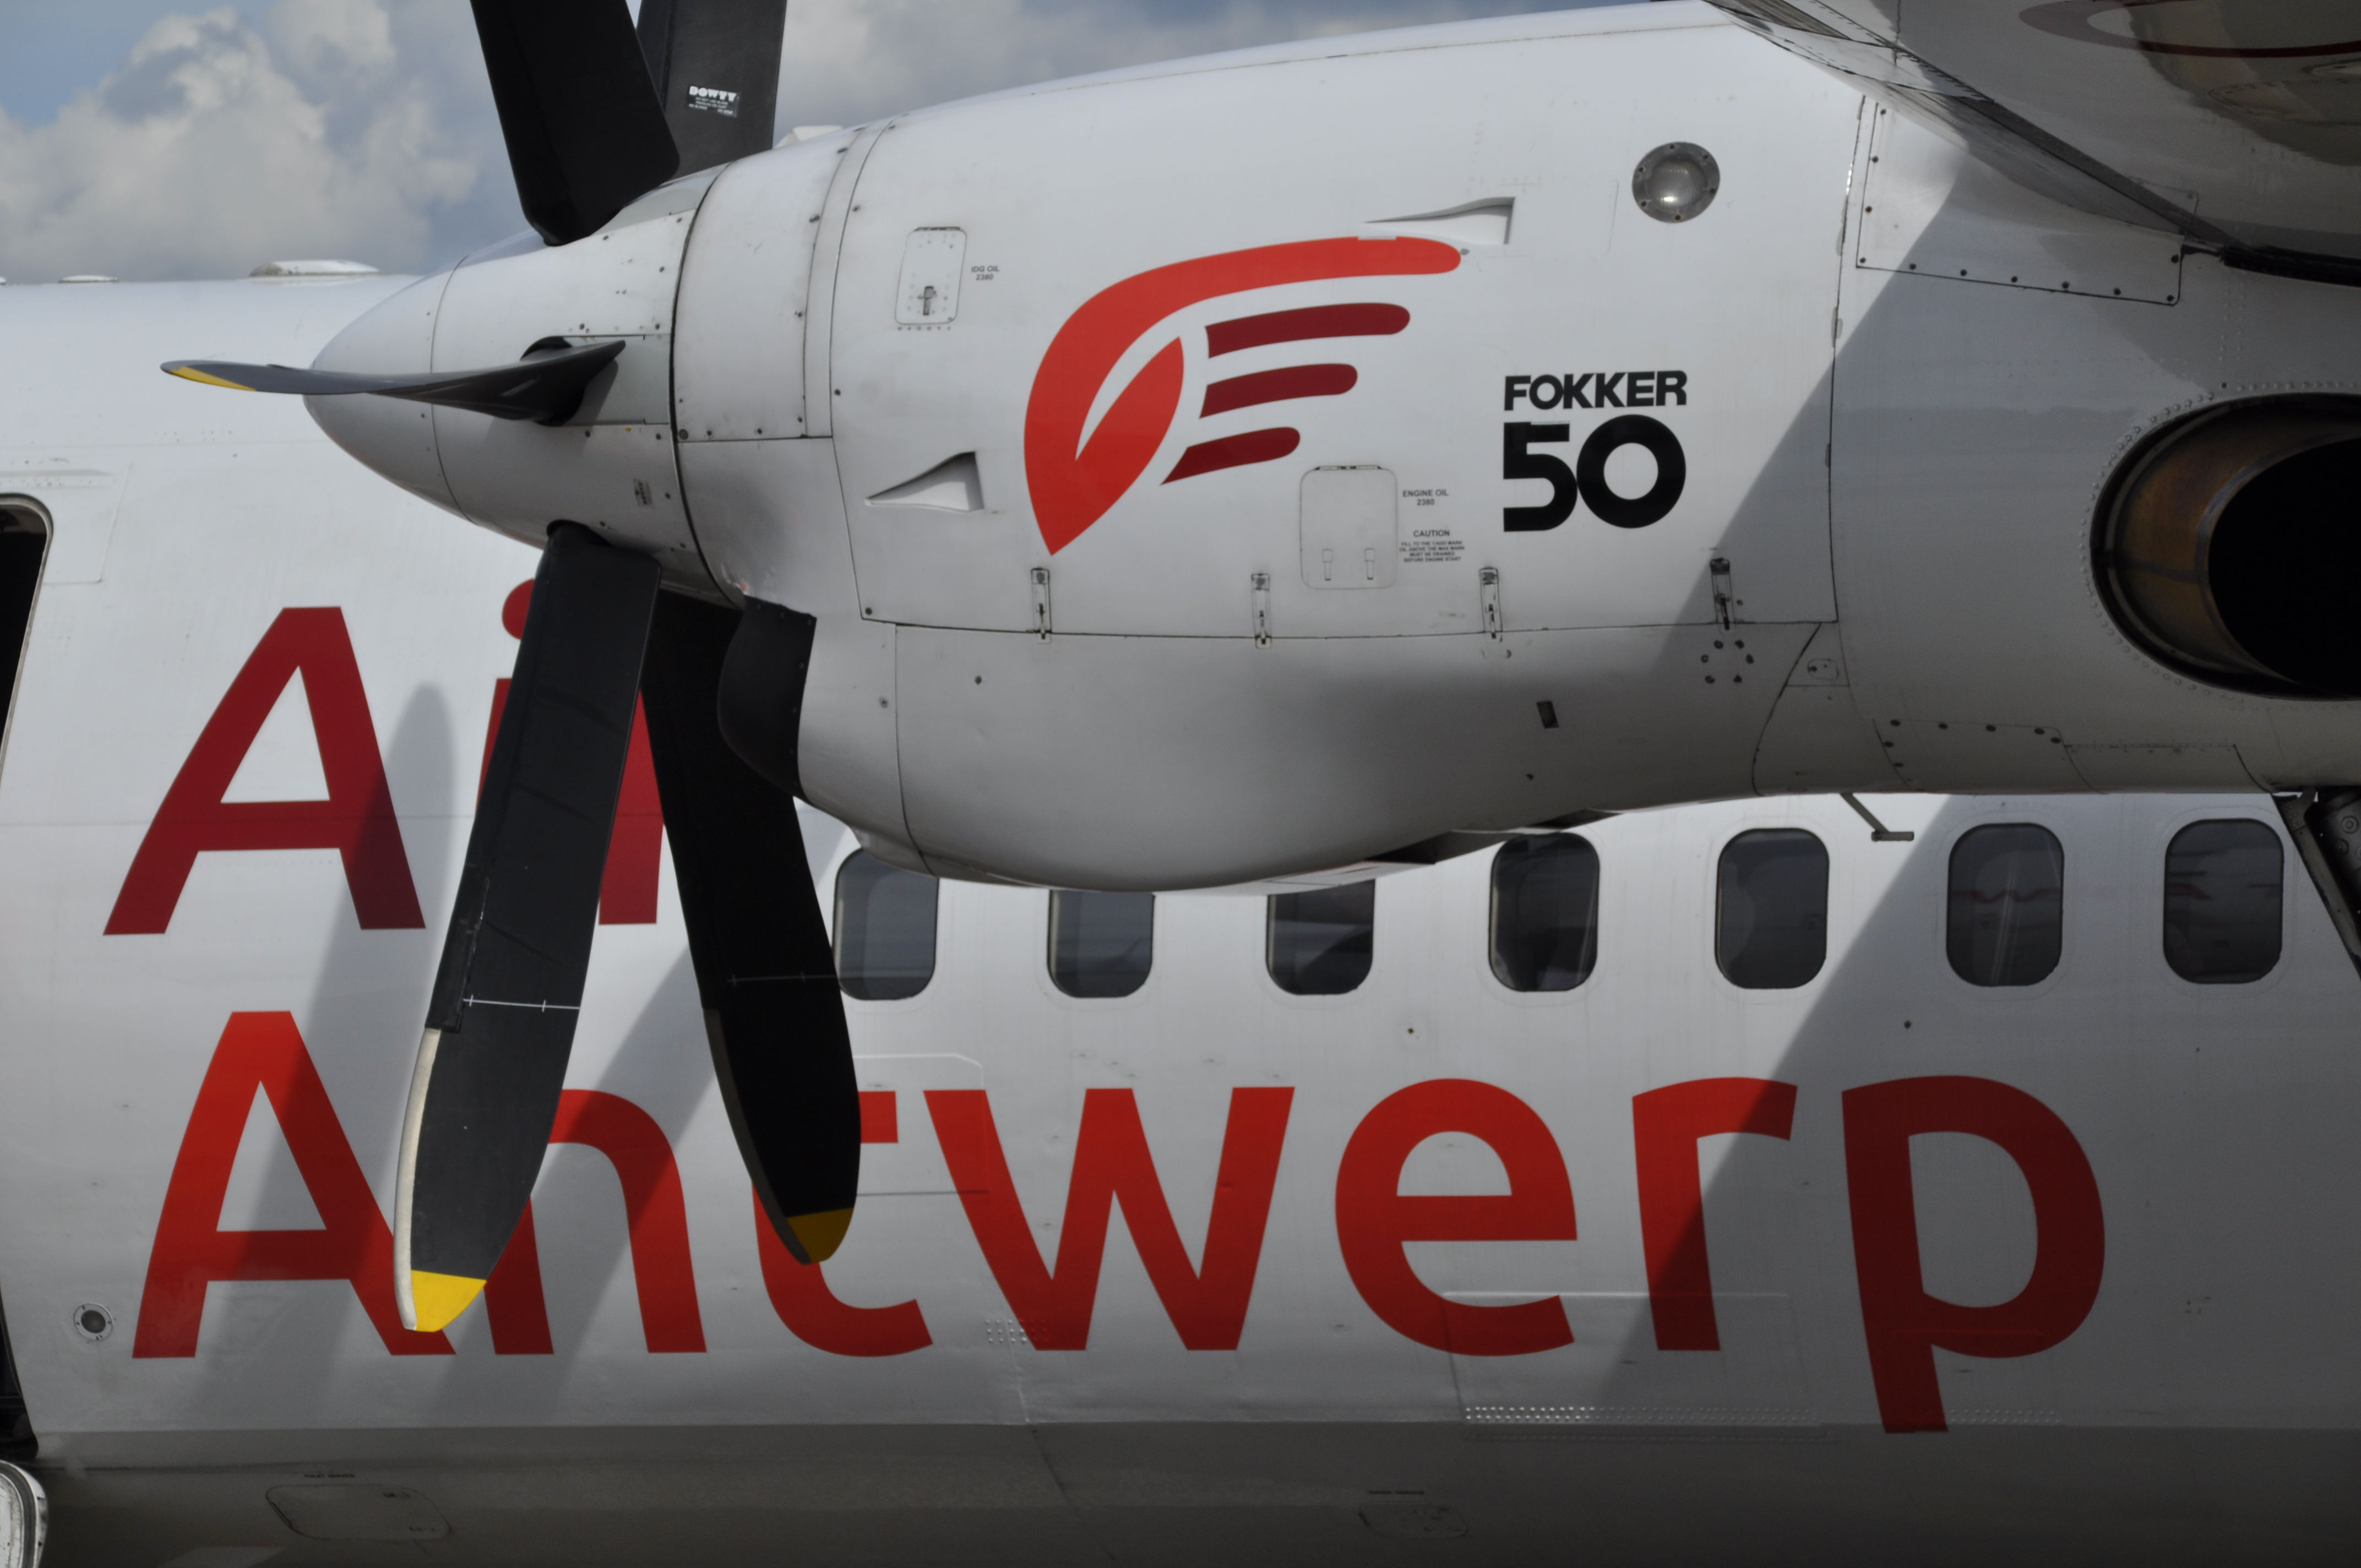 After Air Antwerp shutting down airport seeks replacement